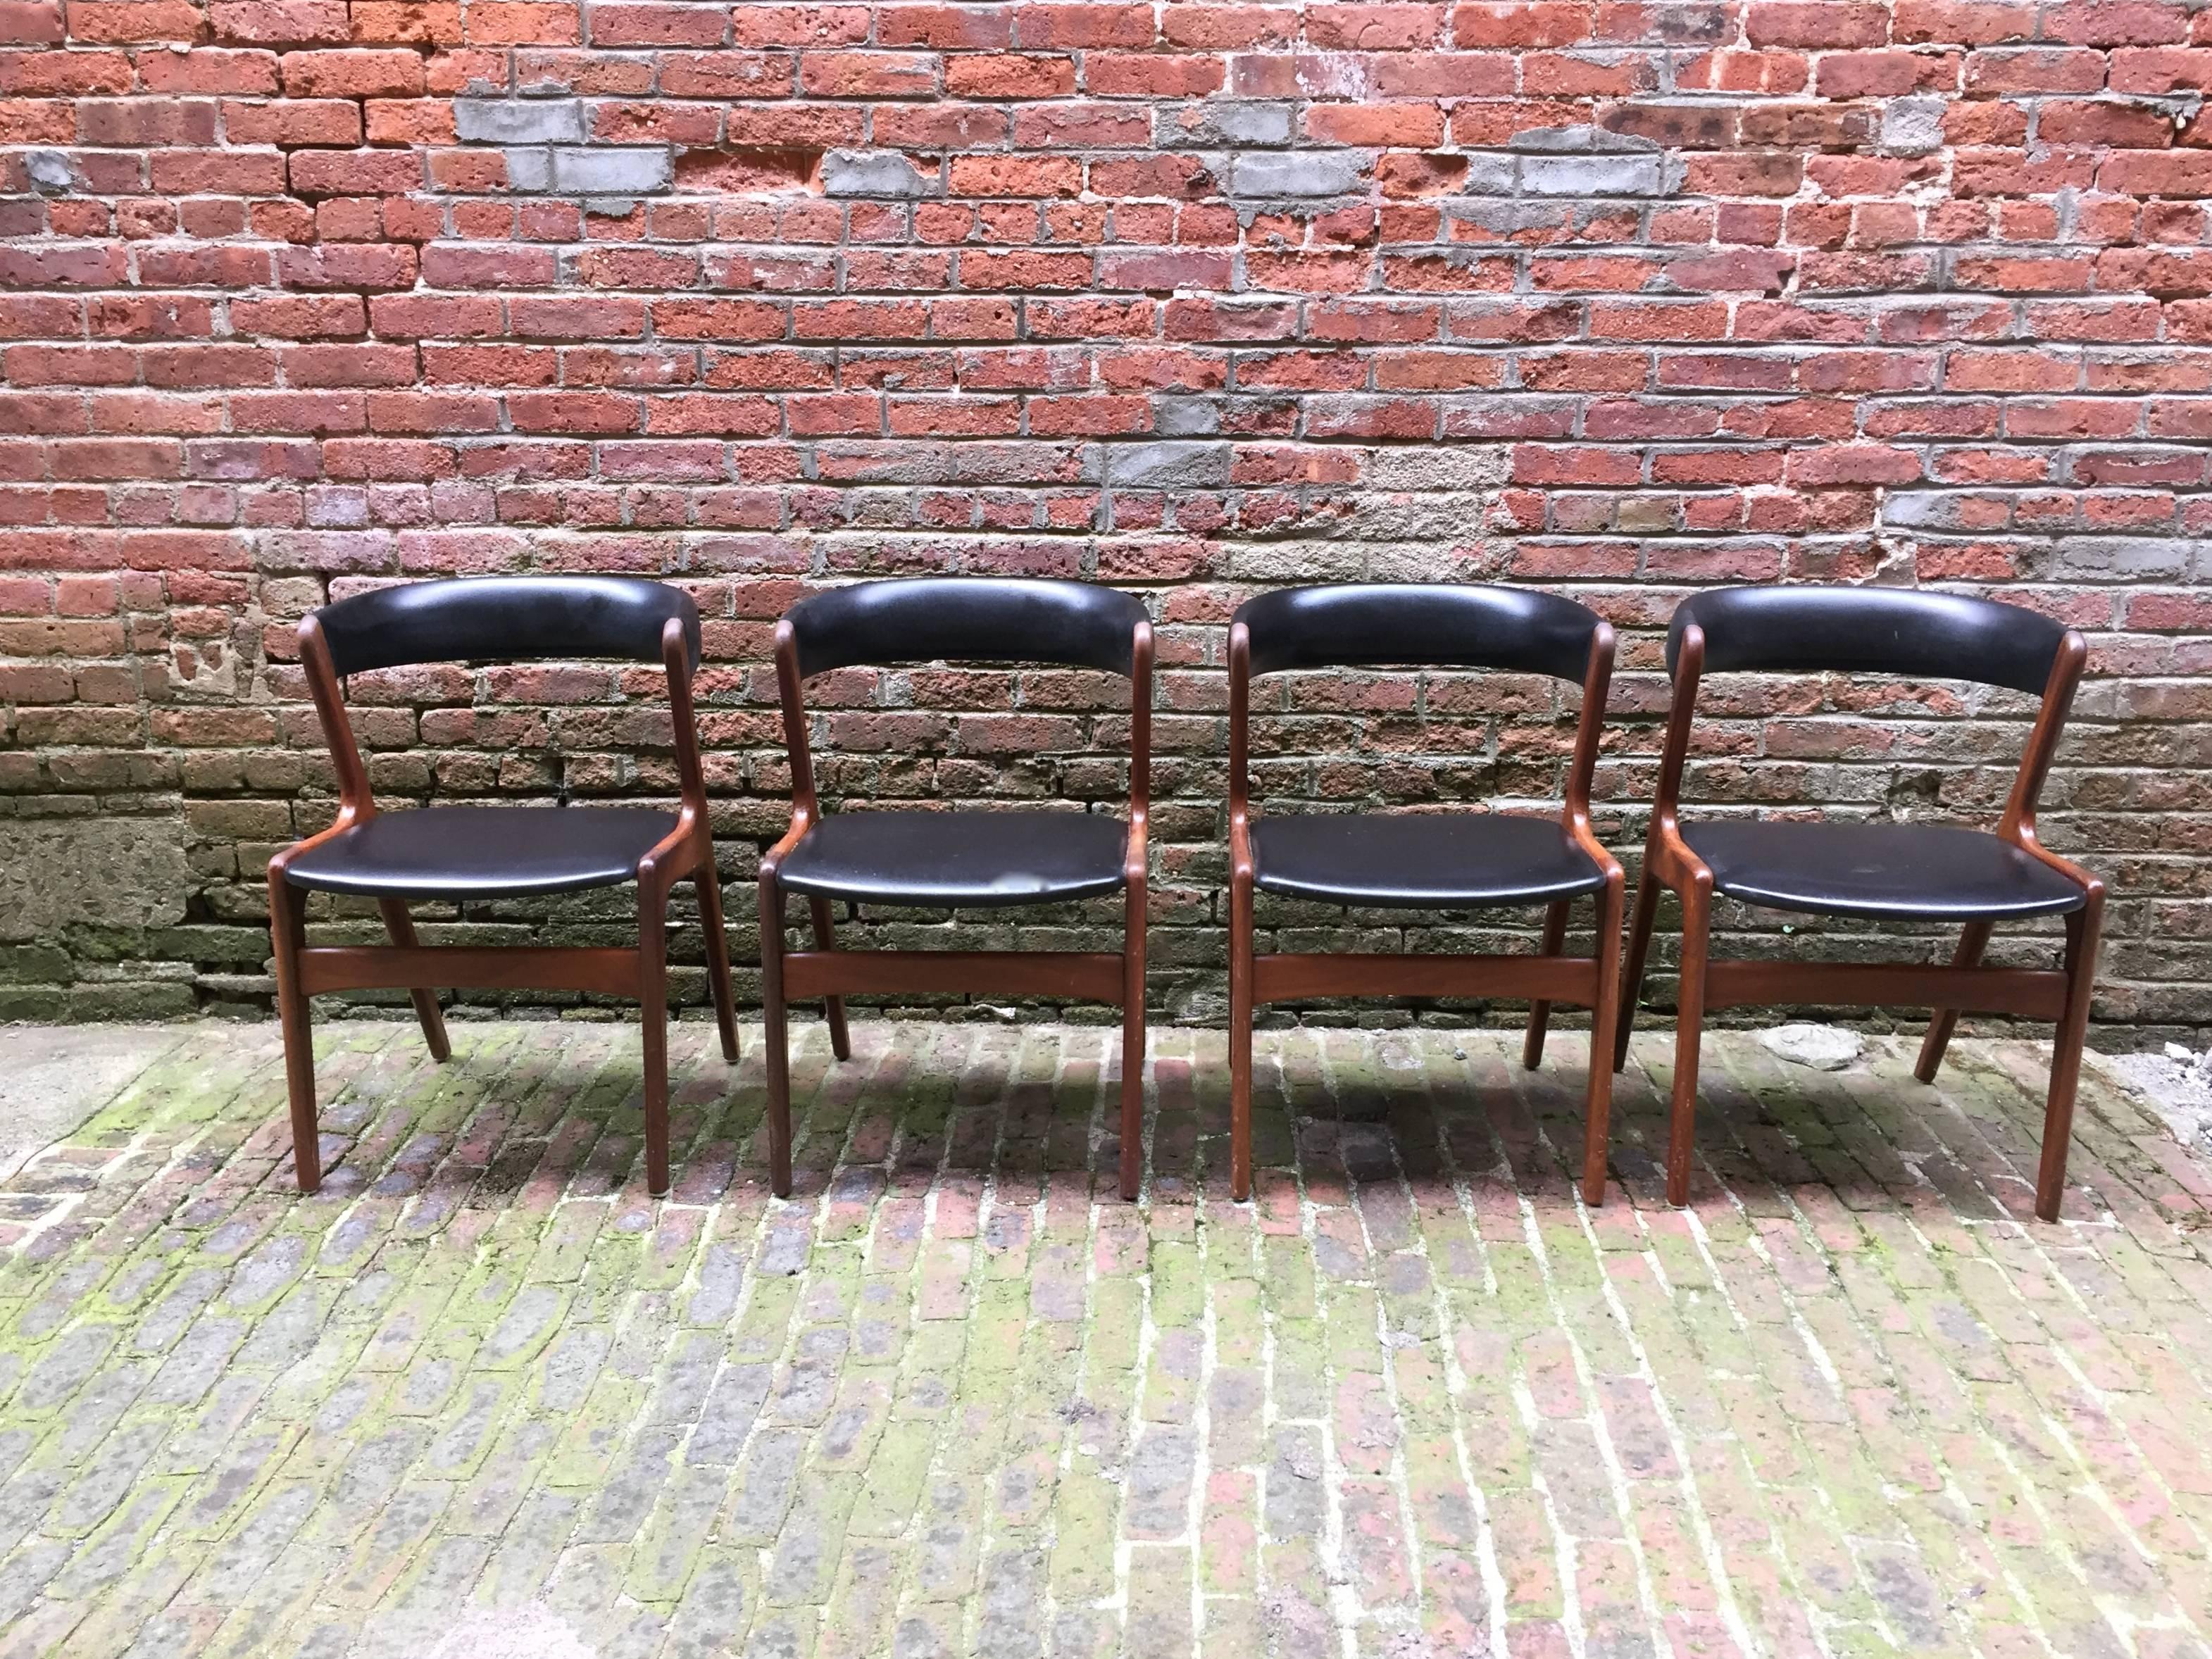 Solid teak design with black leatherette backs and seats. Structurally sound and in very good original condition. Designed for maximum comfort.